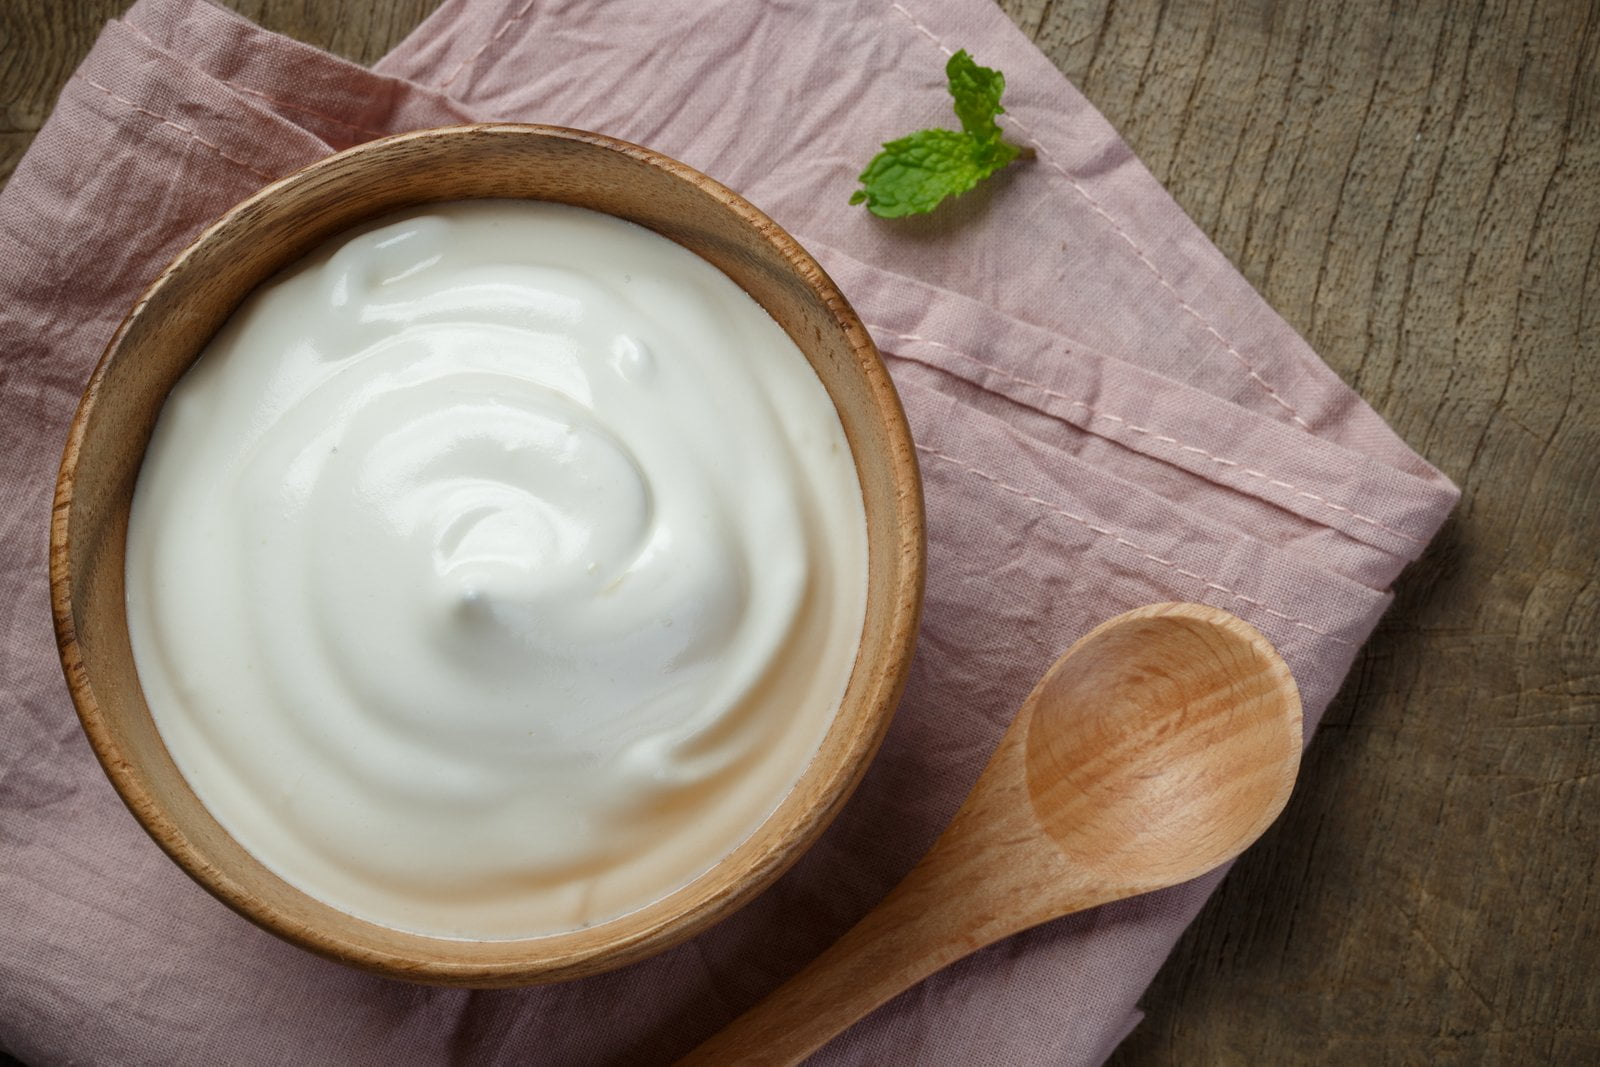 Undeniable Proof That You Need Curd For Hair - Health & Healthier